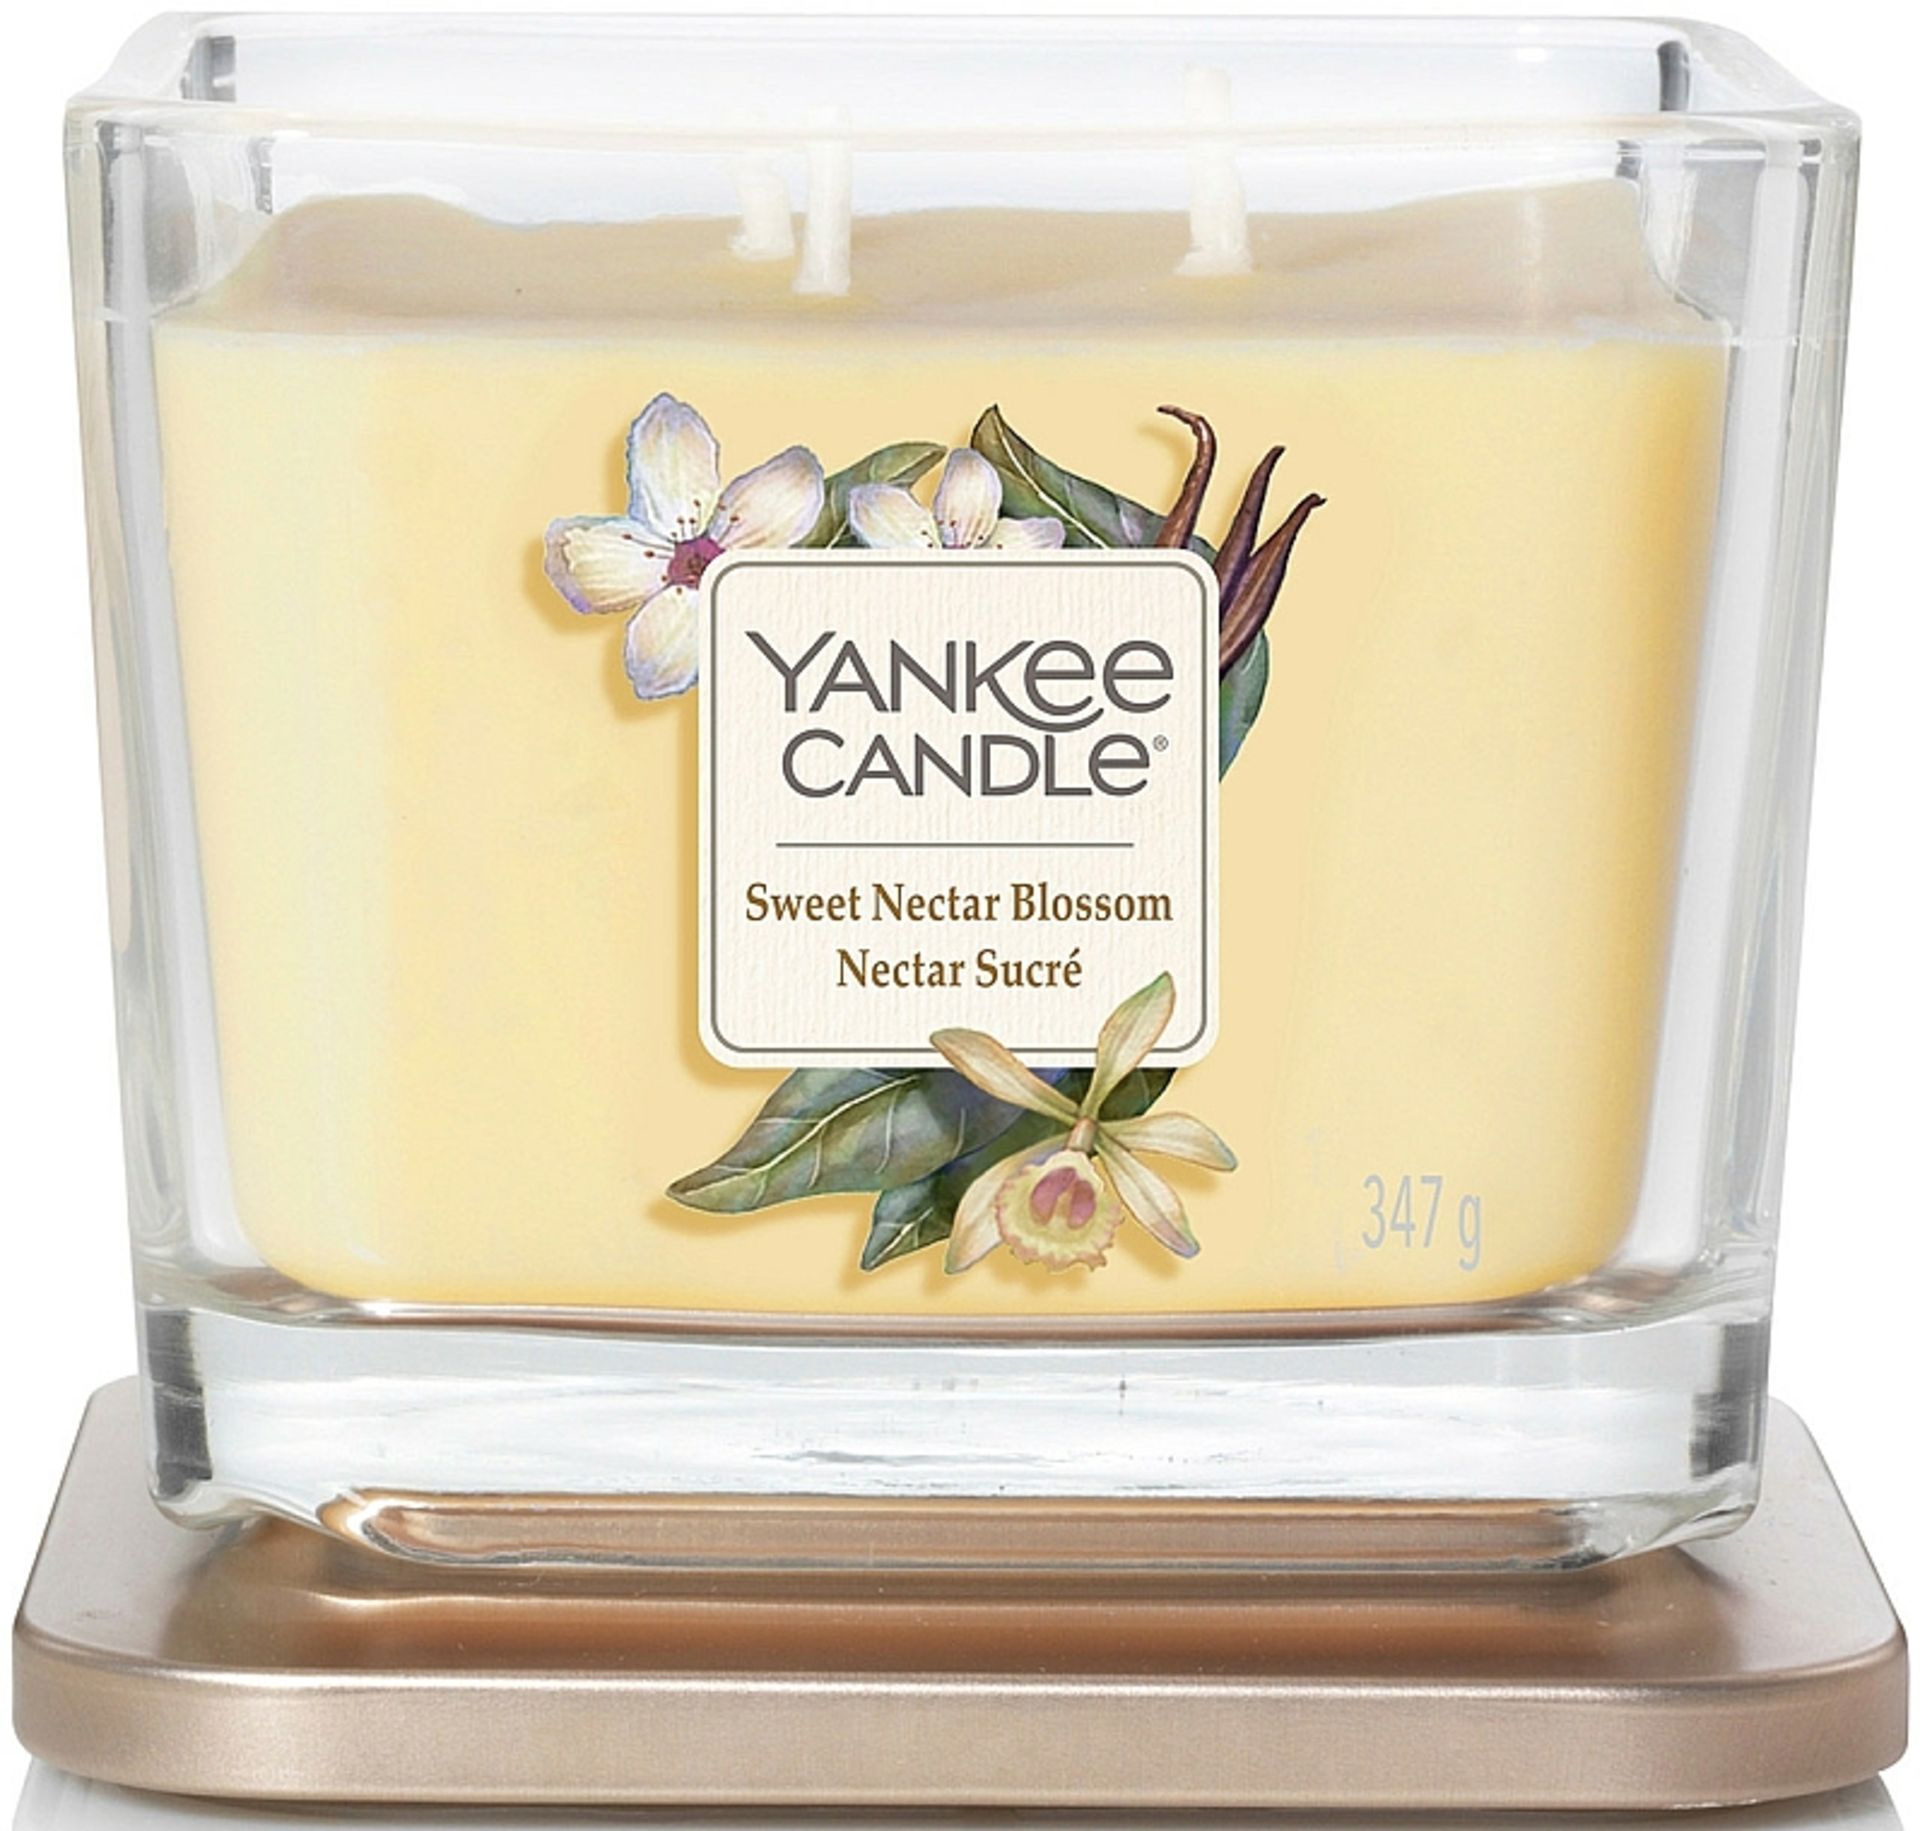 RRP £39.96 - x4 New 96g Sweet Nectar Blossom Yankee Candle